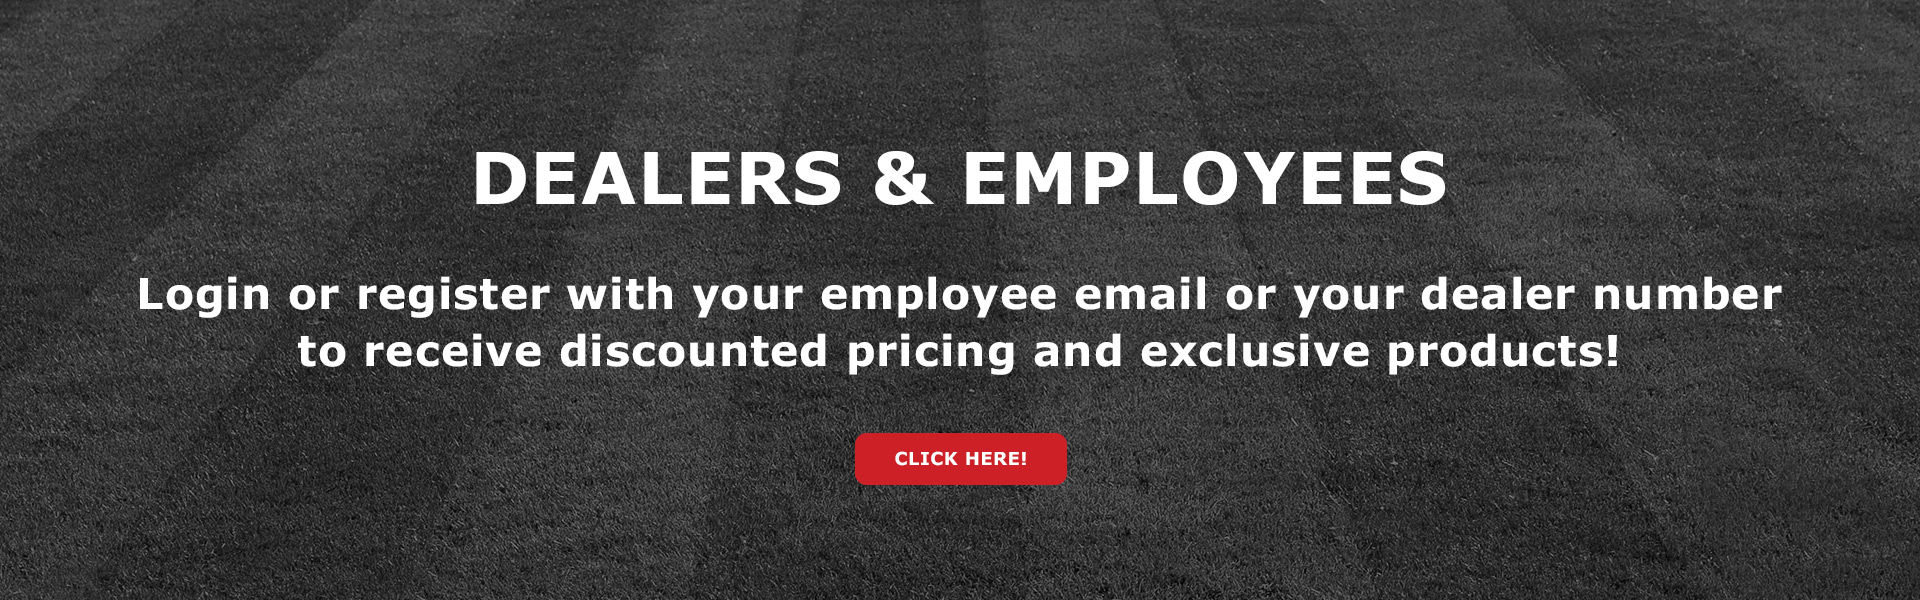 Dealer & Employees - Login or register with your employee email or your dealer number to receive discounted pricing and exclusive products!